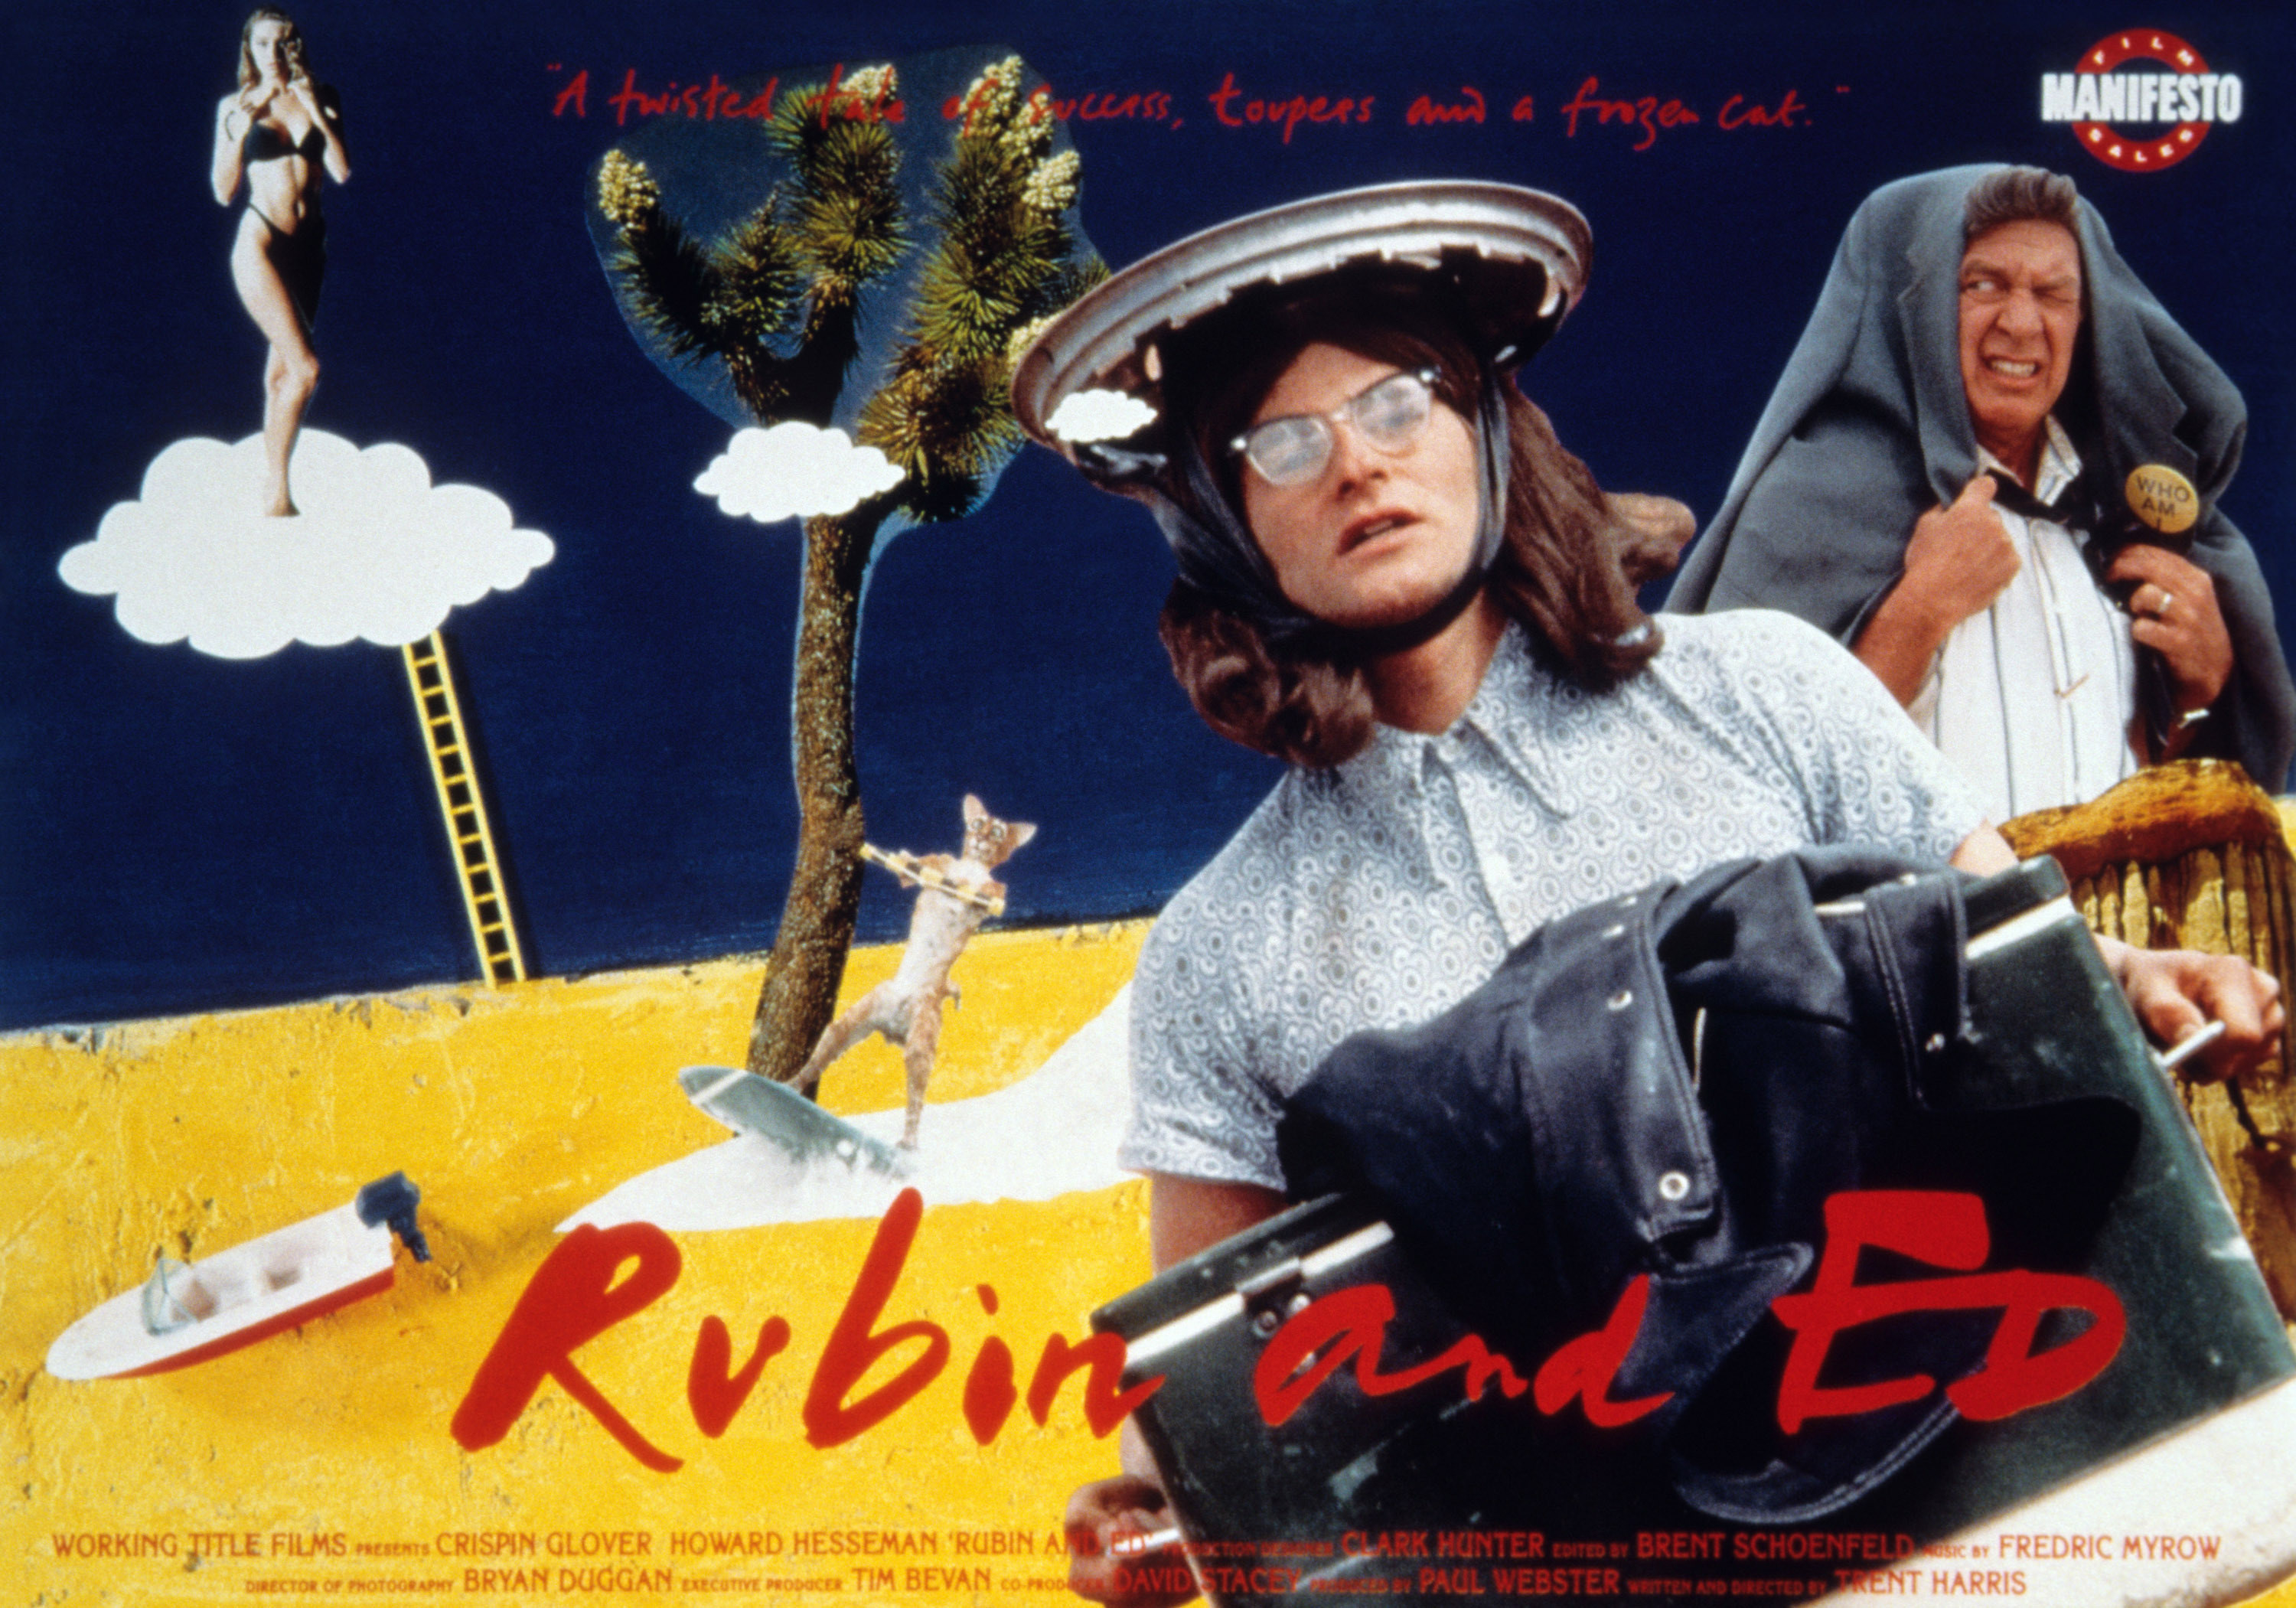 Theatrical Poster for &quot;Rubin and Ed&quot;